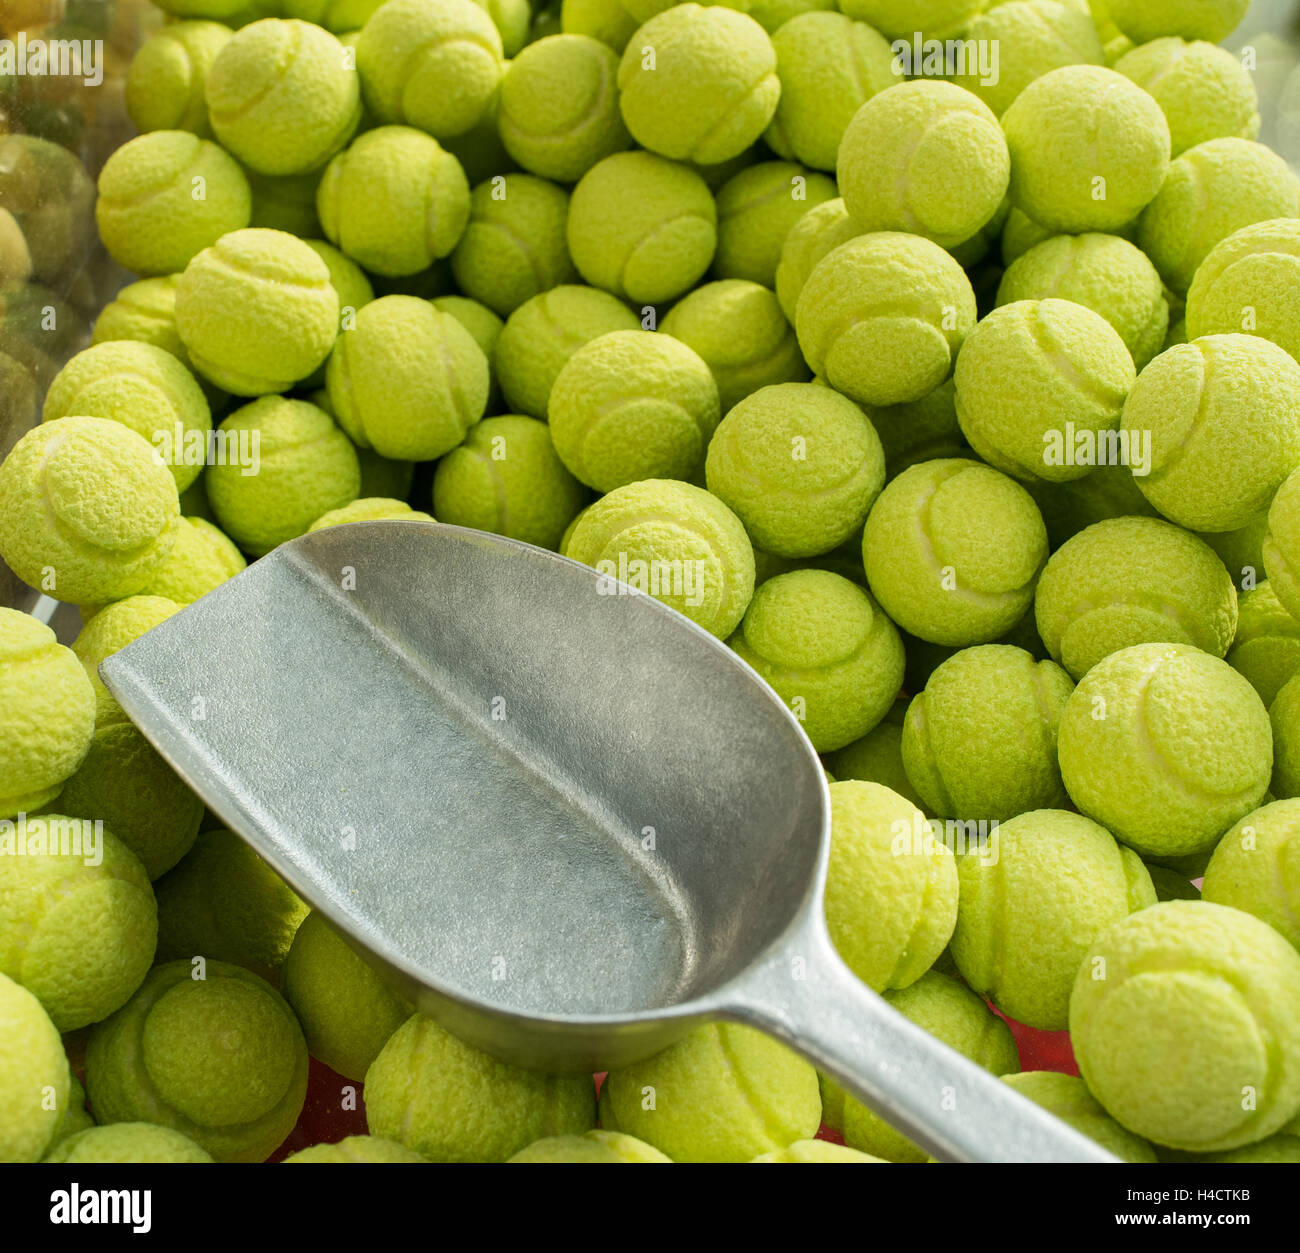 background of sweet green jelly tennis balls with spoon Stock Photo - Alamy